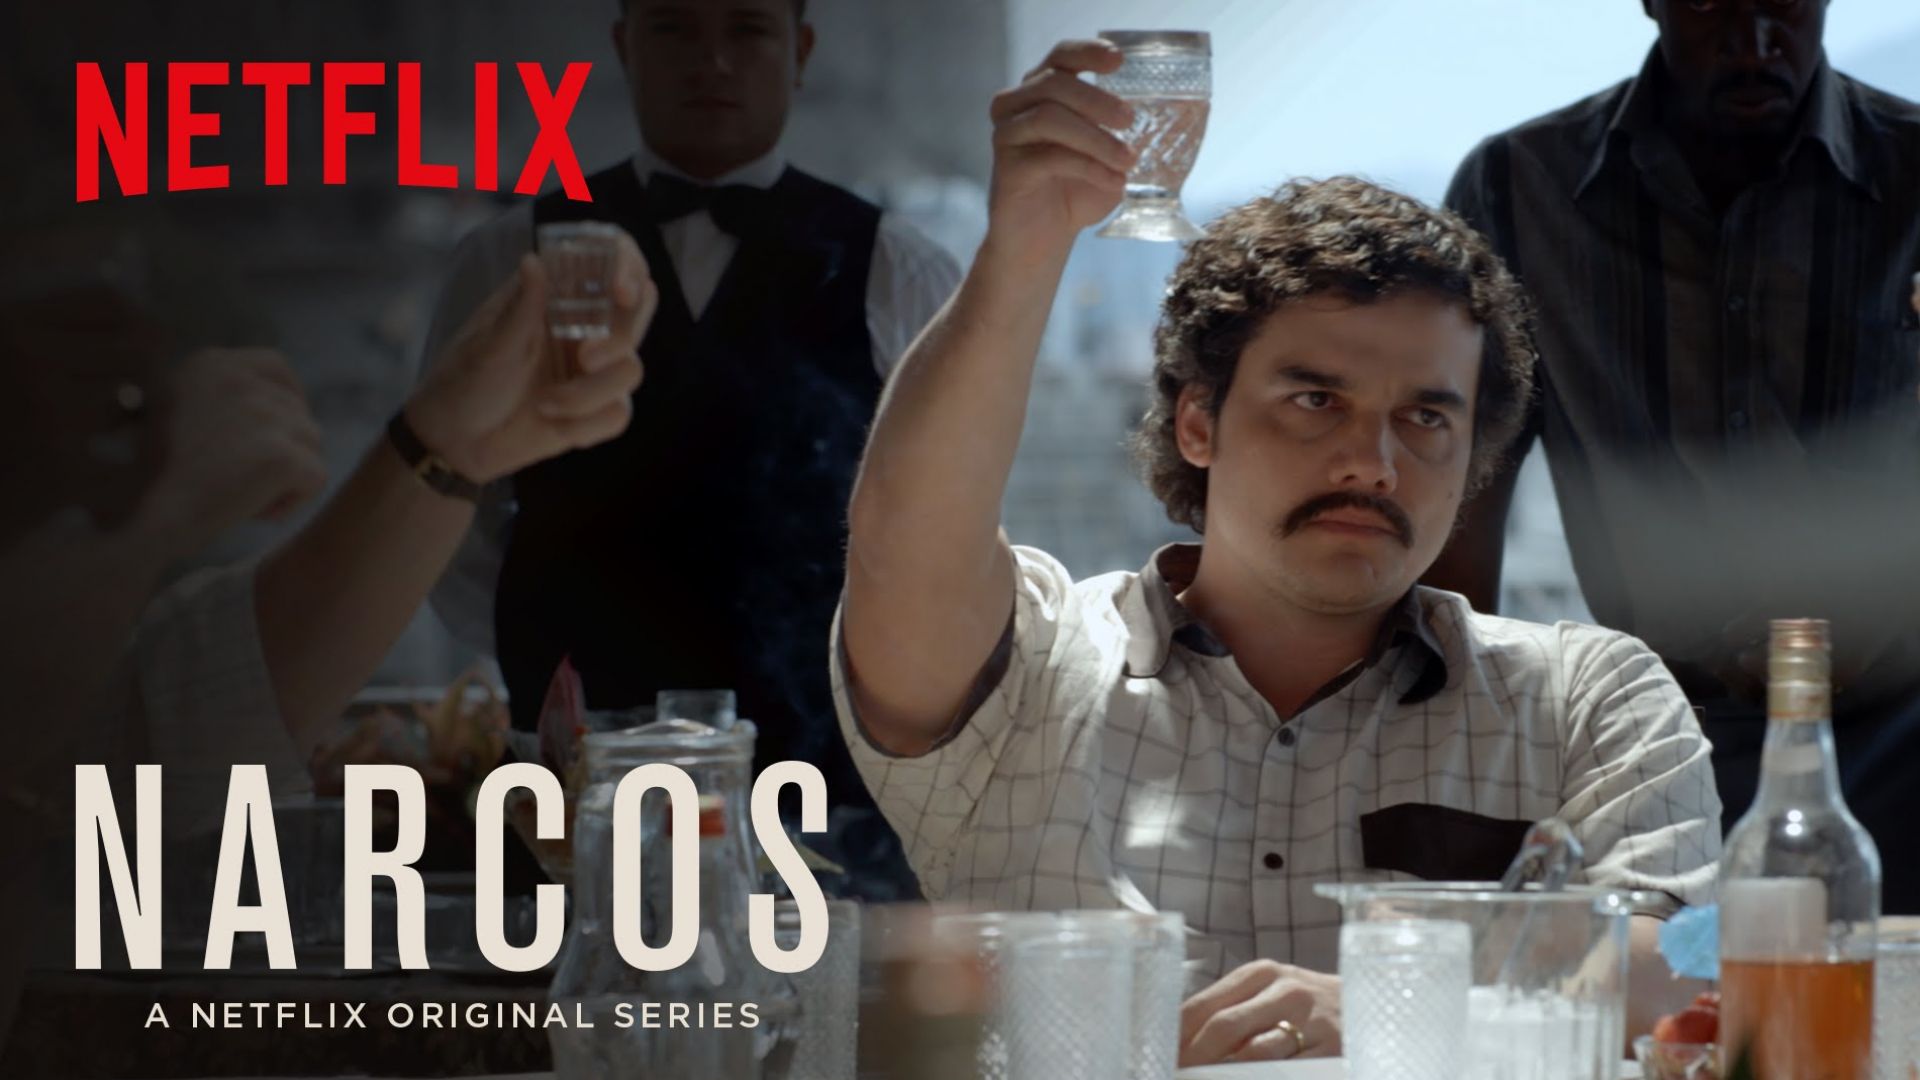 The Making of Narcos